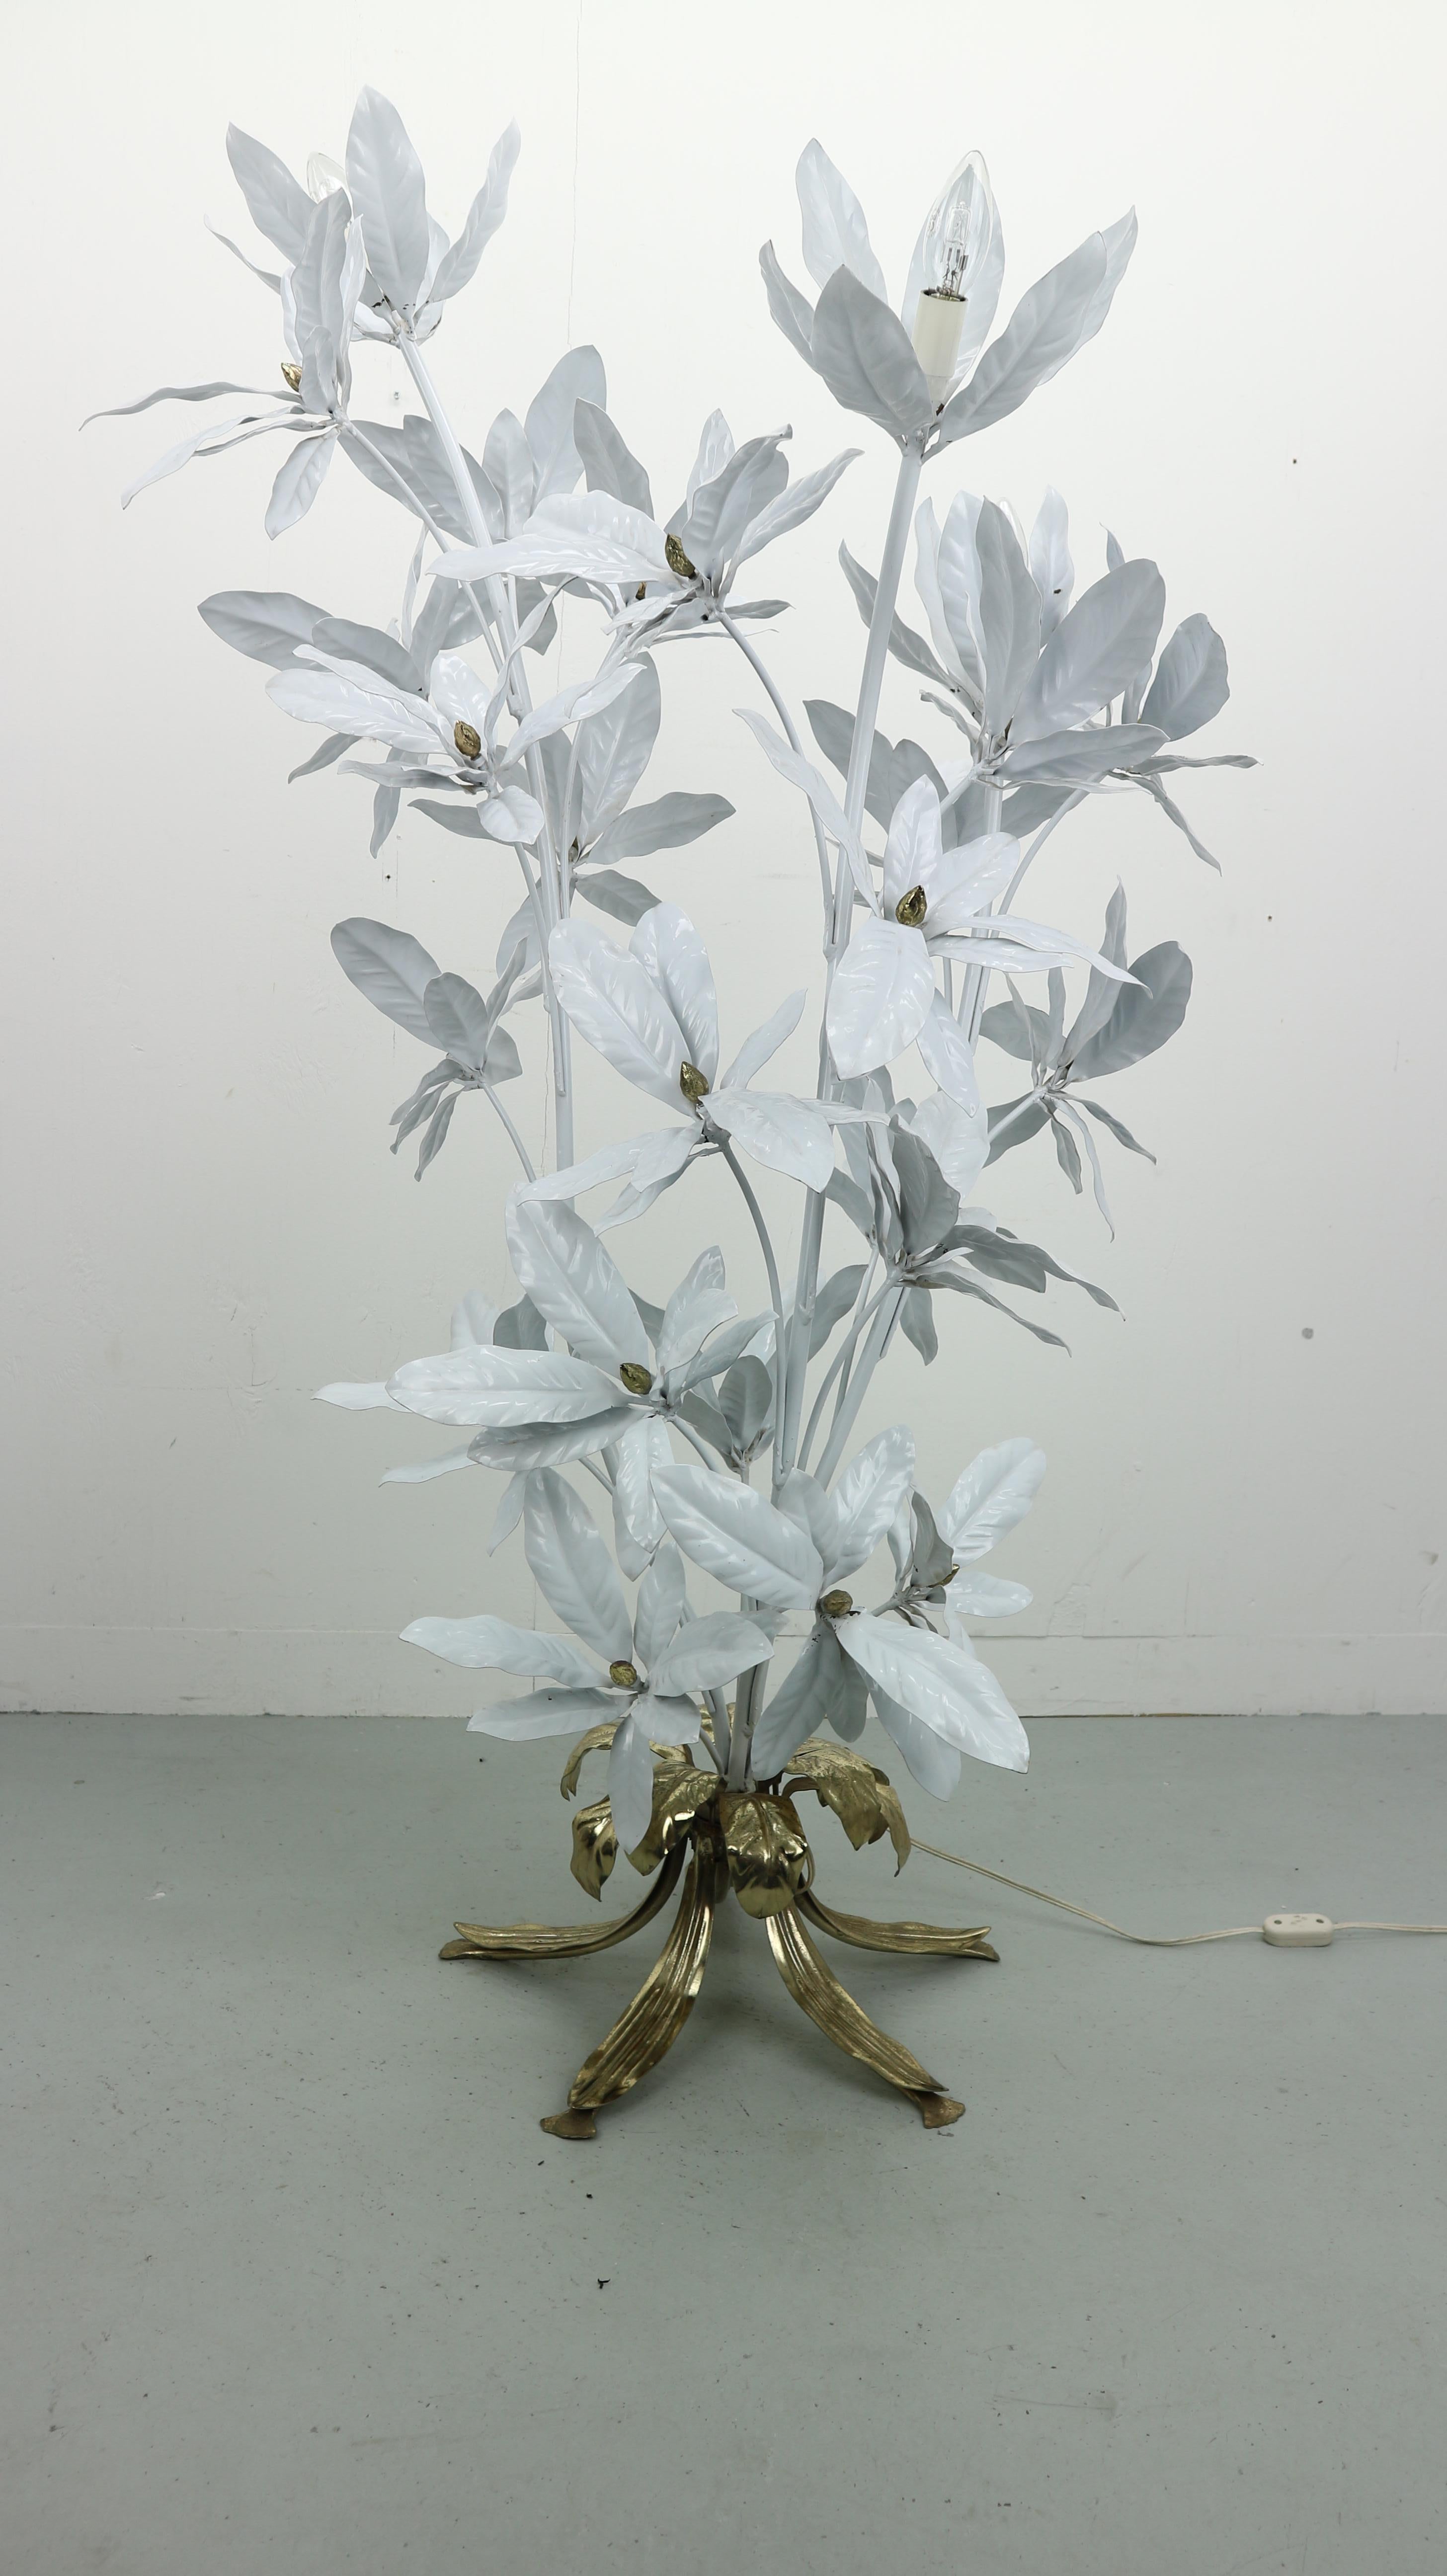 Midcentury floor-lamp attributed to Hans Kögl, Germany, 1970s.
This rare, stunning large statement floor lamp in a bronzed gold tone and white flower leaves.
The light has three large naturalistic stems with leaves and illuminated flowers at the